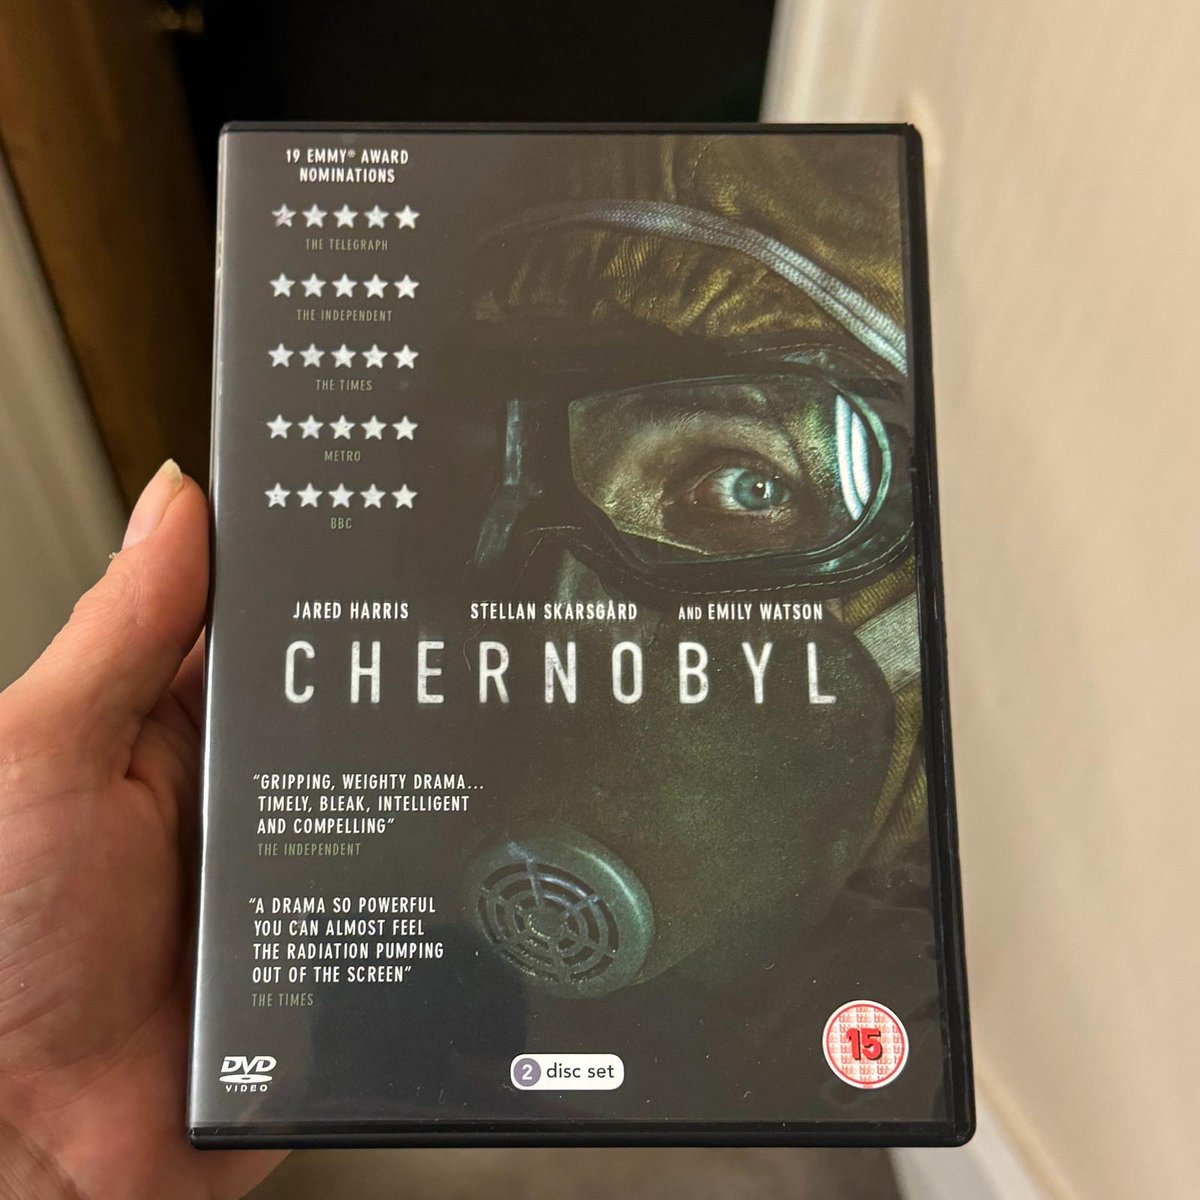 Nighty night, kiddies. Winding down with a fun watch…

The Hildur Guðnadóttir soundtrack remains a discordant dream reminiscent of the early Musique Concrète and Radiophonic Workshop output. Needless to say, I fucking love it.

#Chernobyl